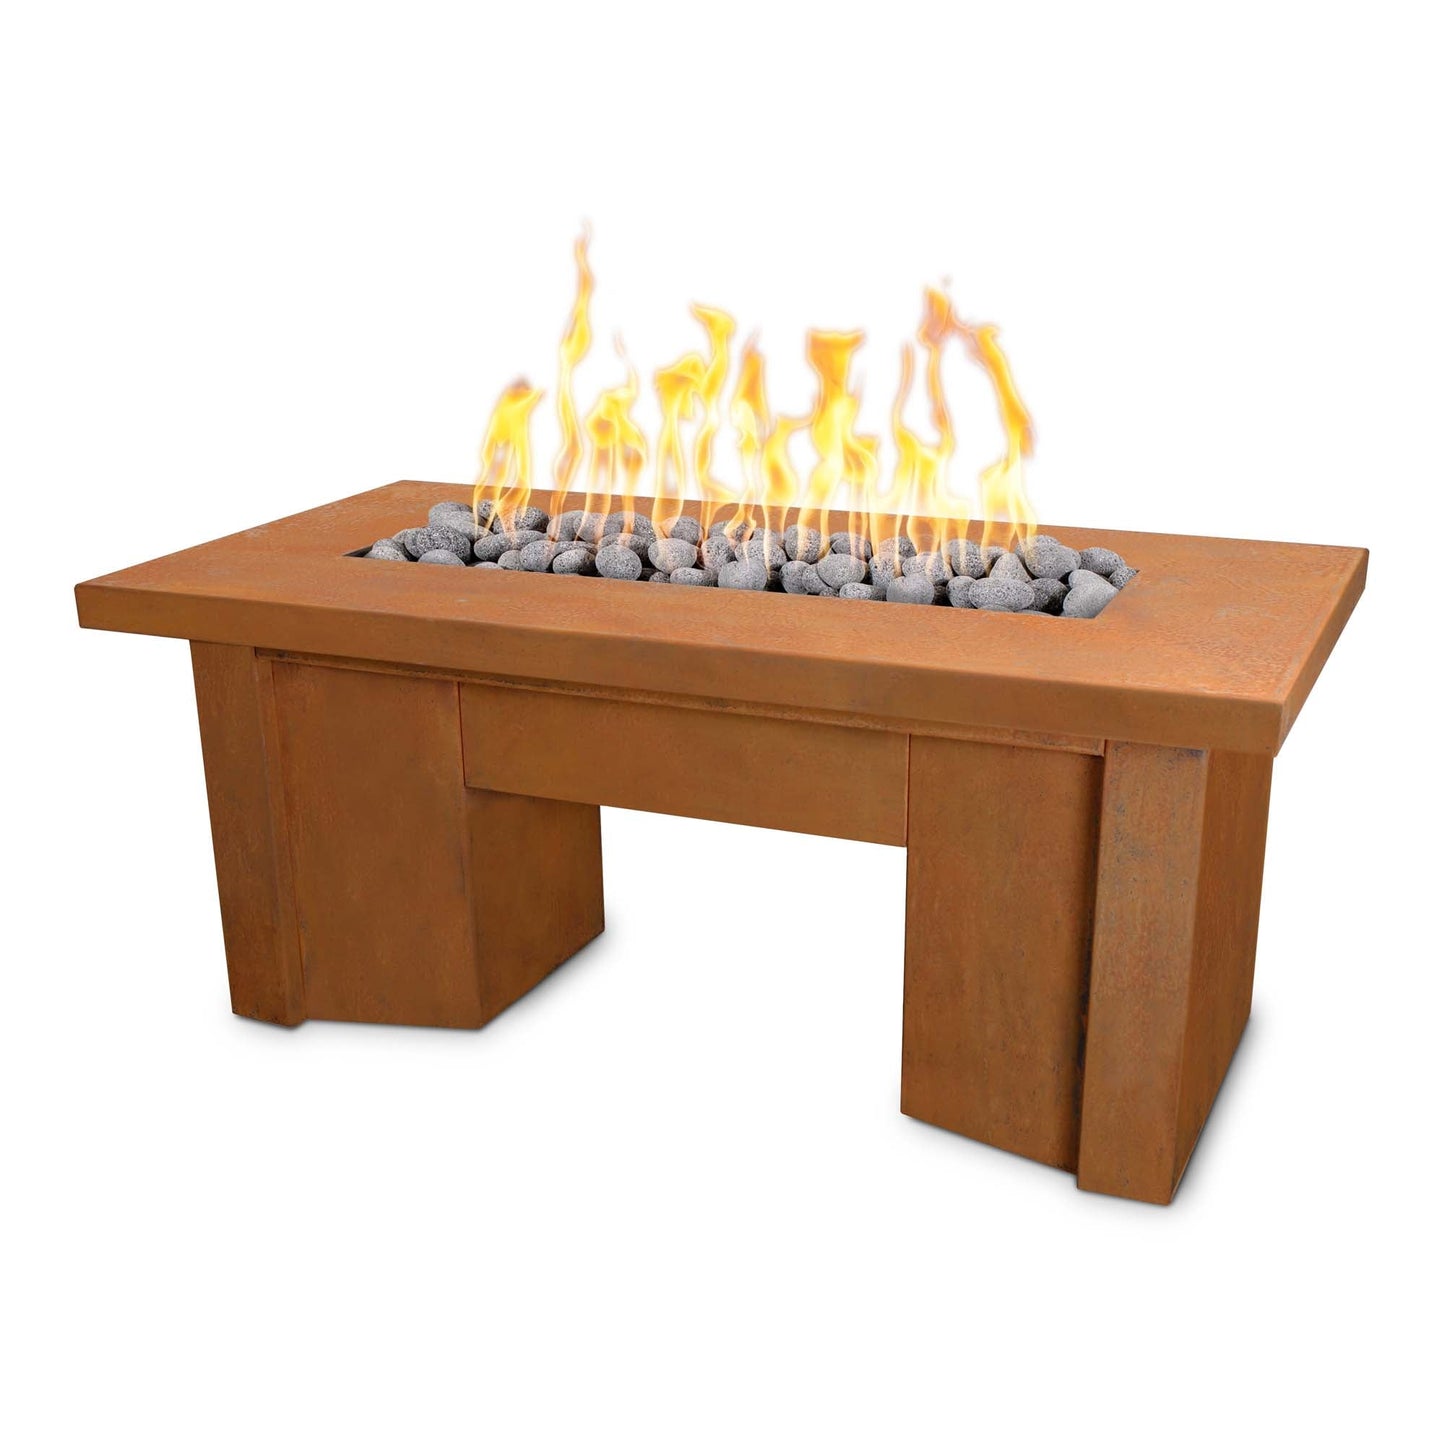 The Outdoor Plus Rectangular Alameda 48" Corten Steel Liquid Propane Fire Pit with Match Lit Ignition